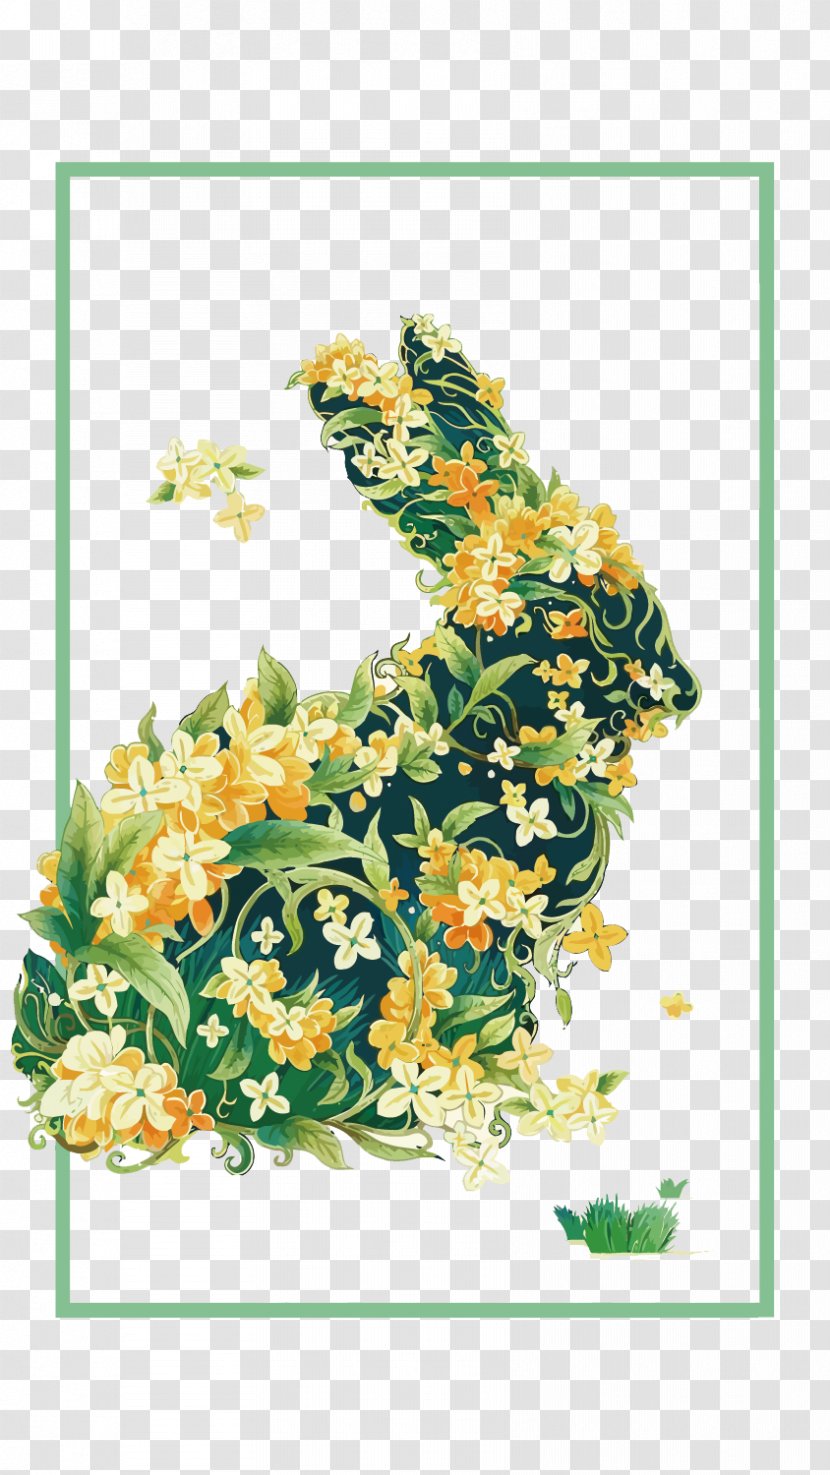 Flower Illustration - Plant - Vector Flowers And Bunny Transparent PNG